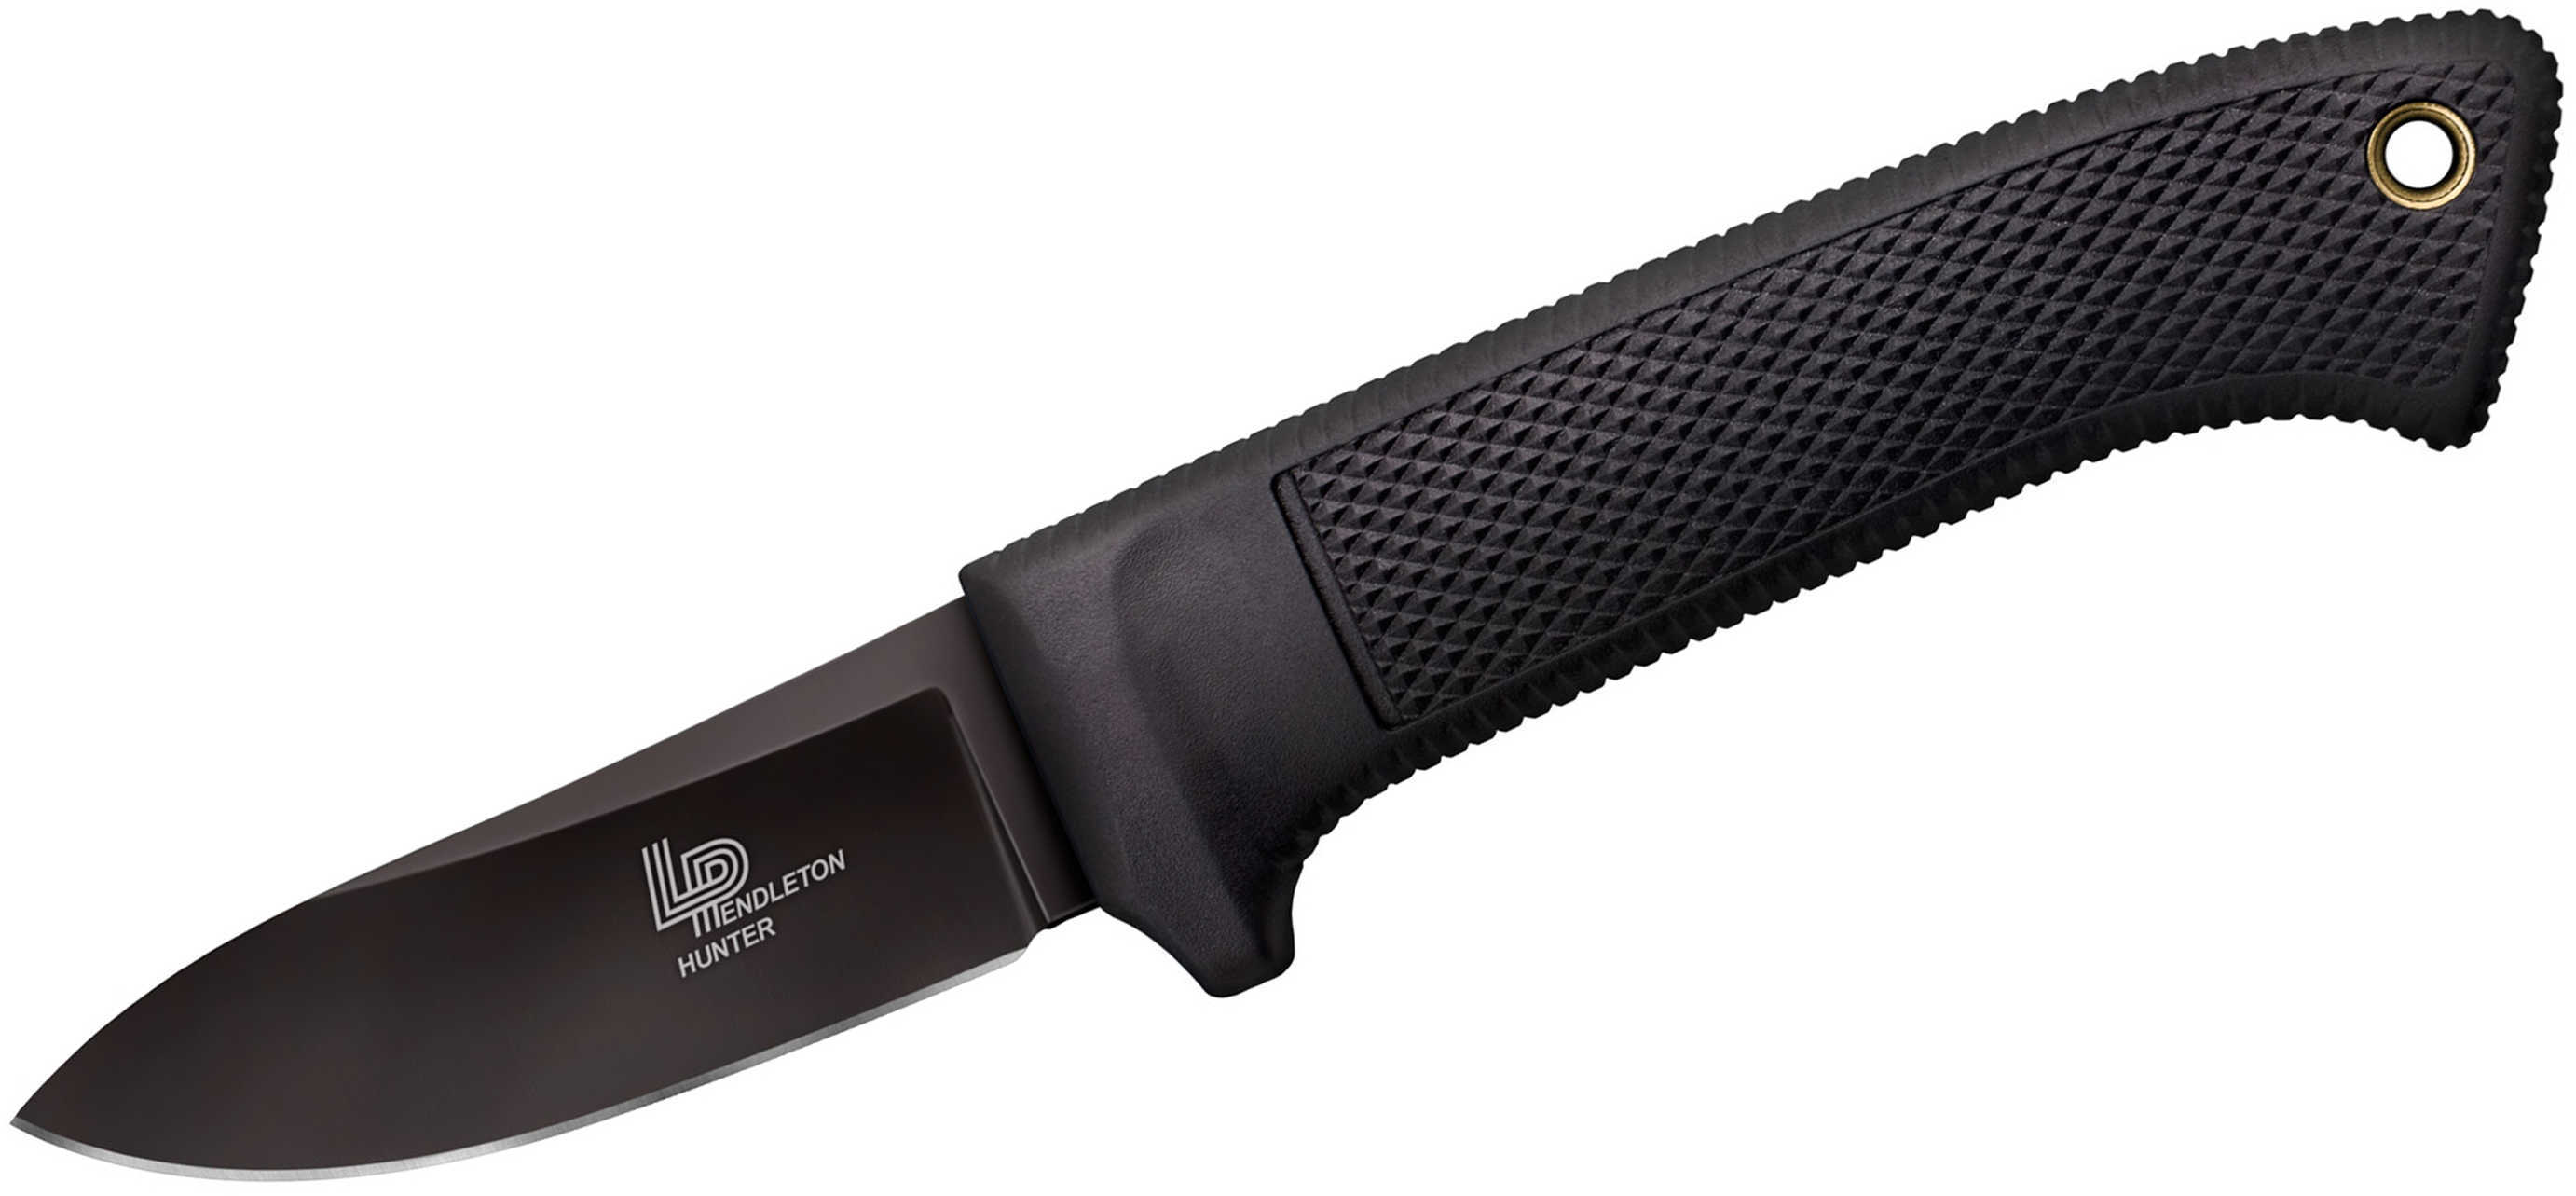 Cold Steel Pendelton Hunter 3.5" Fixed Blade Knife DLC Coating CPM 3-V High Carbon With Secure-Ex Sheath Md: 36LPCSS